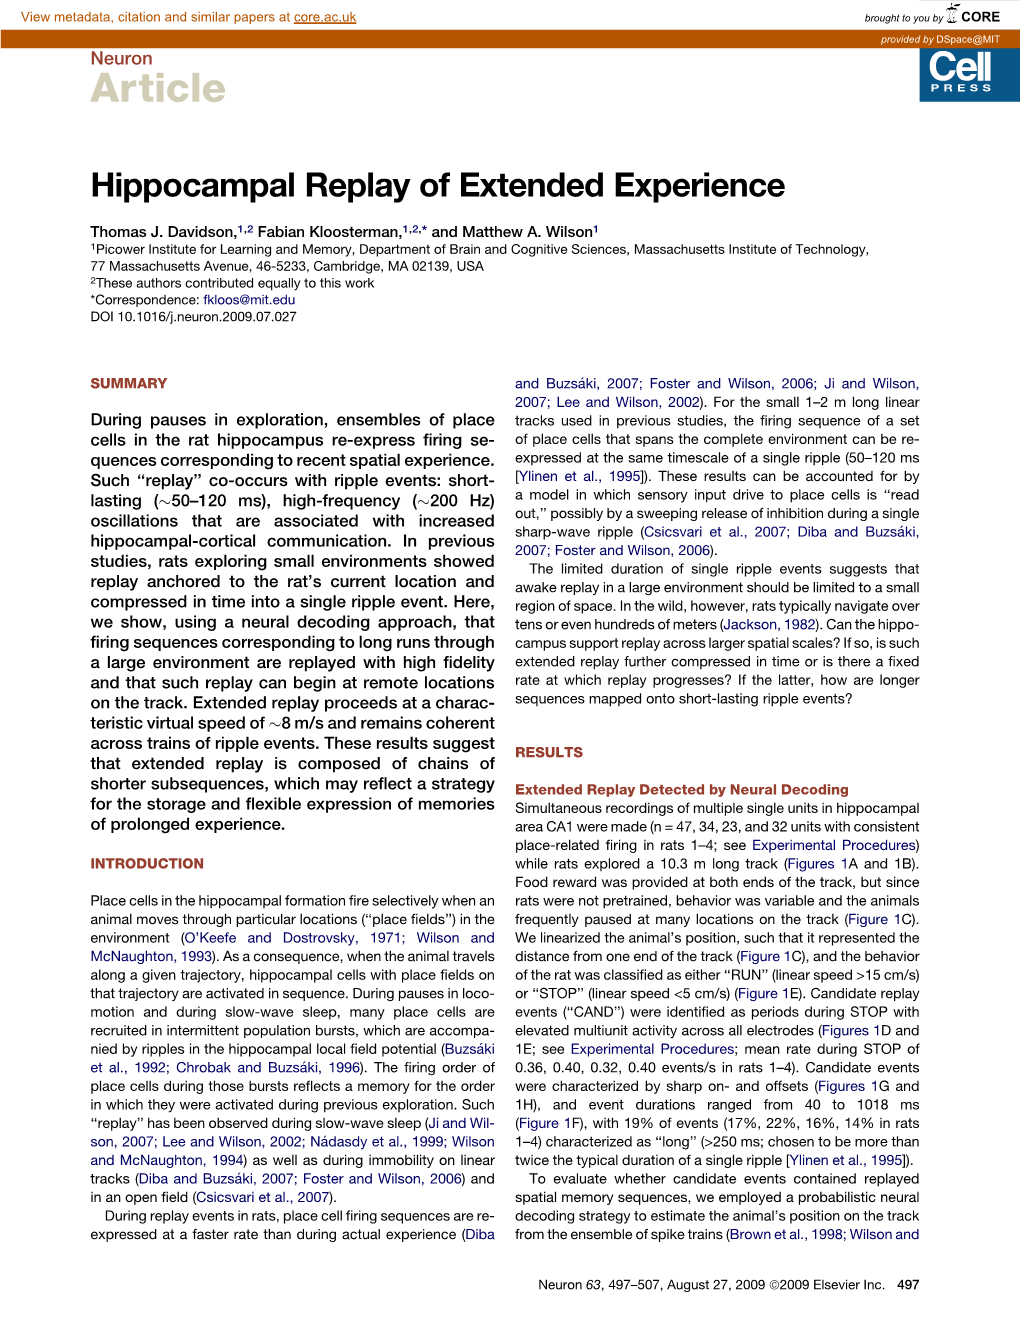 Hippocampal Replay of Extended Experience